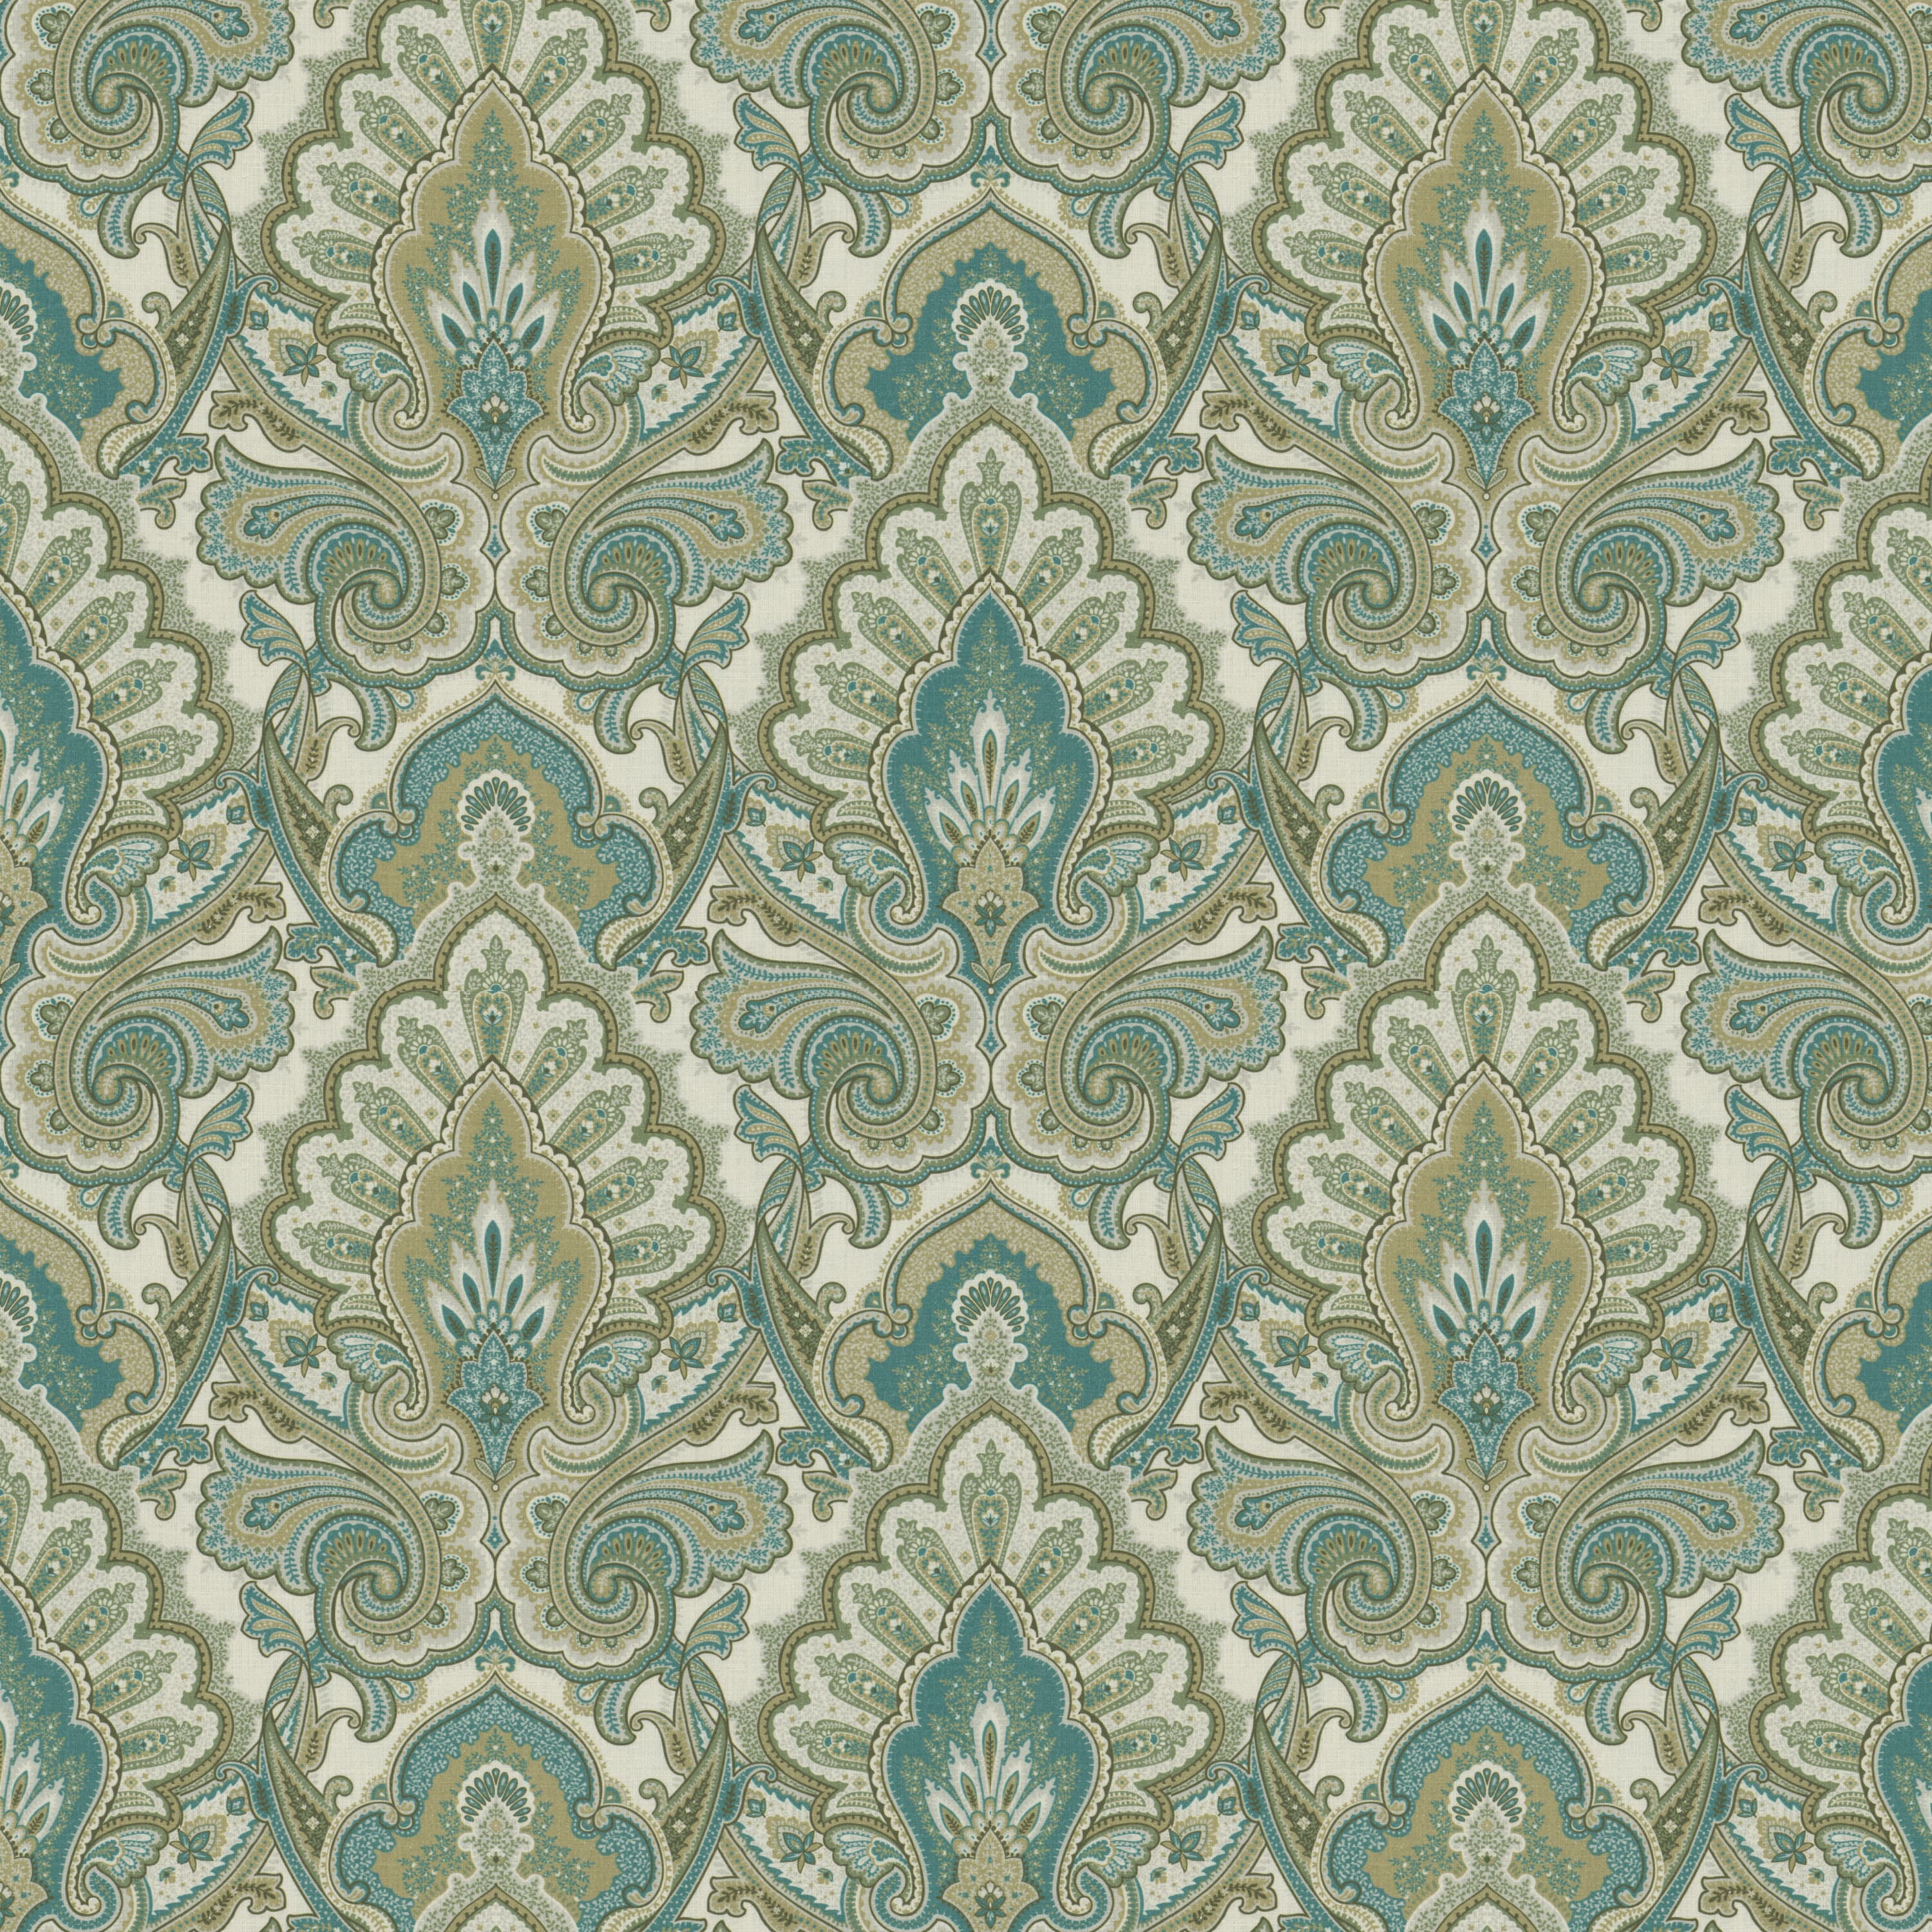 Roget 1 Shoreline by Stout Fabric